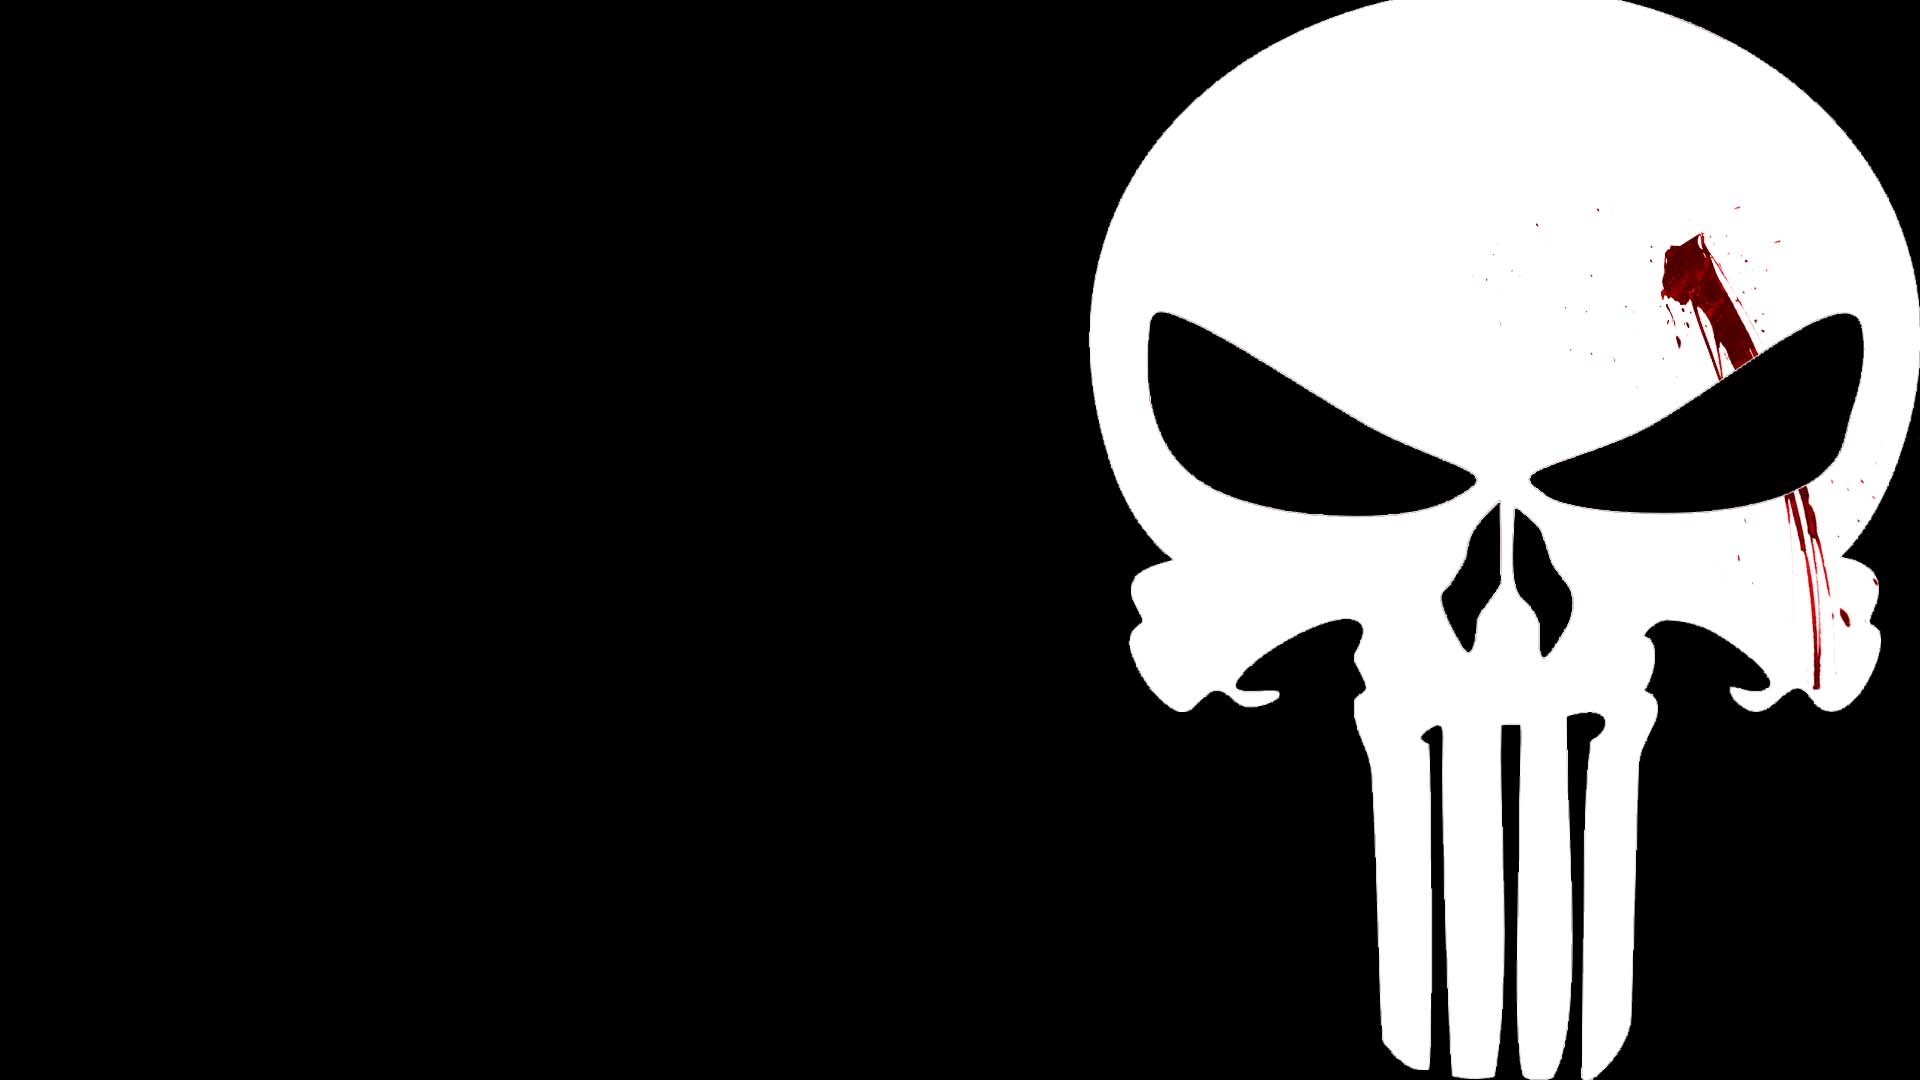 The Punisher Material Logo Wallpapers